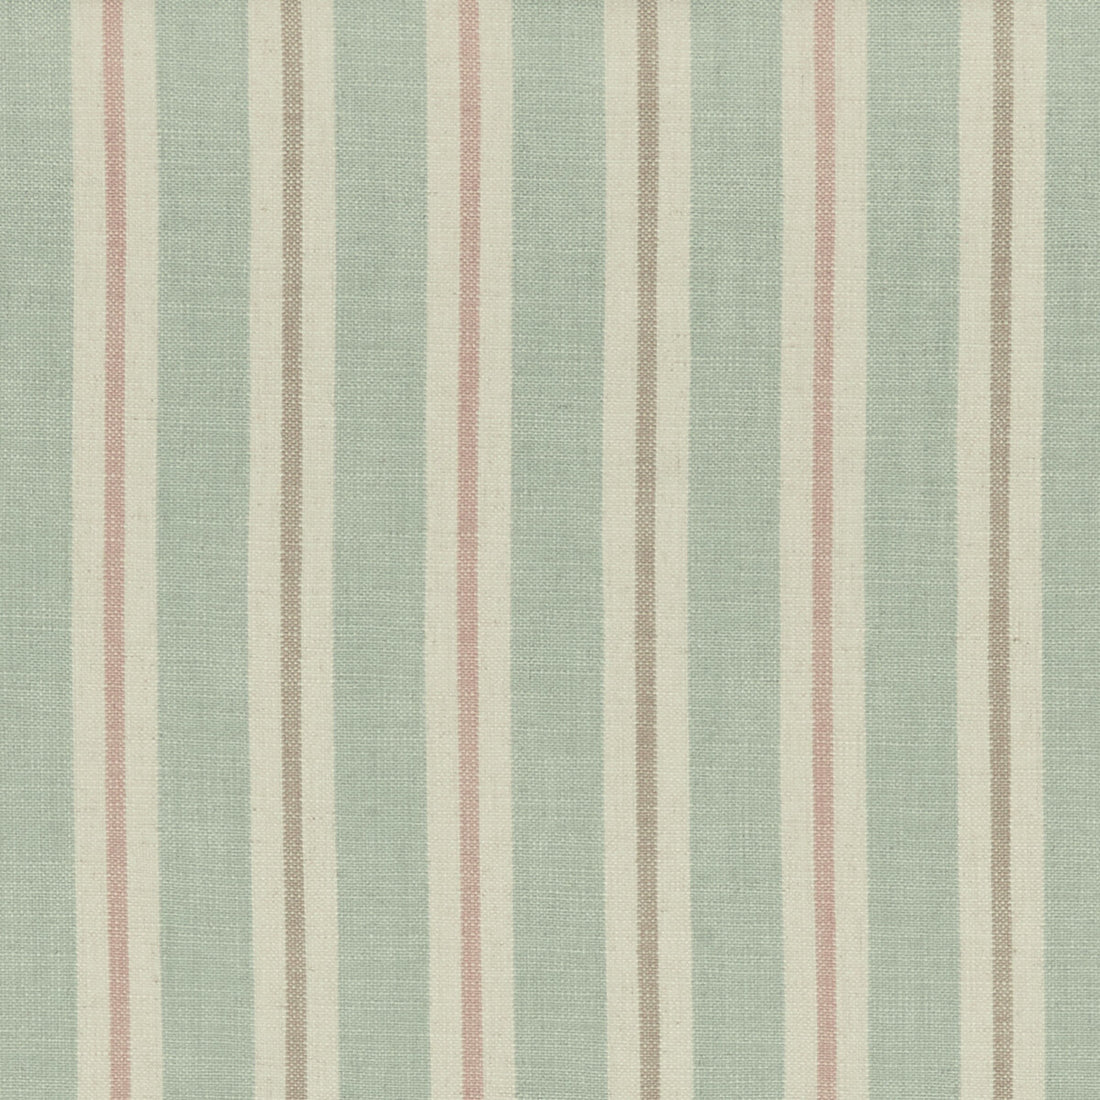 Sackville Stripe fabric in mineral/blush color - pattern F1046/05.CAC.0 - by Clarke And Clarke in the Clarke &amp; Clarke Castle Garden collection